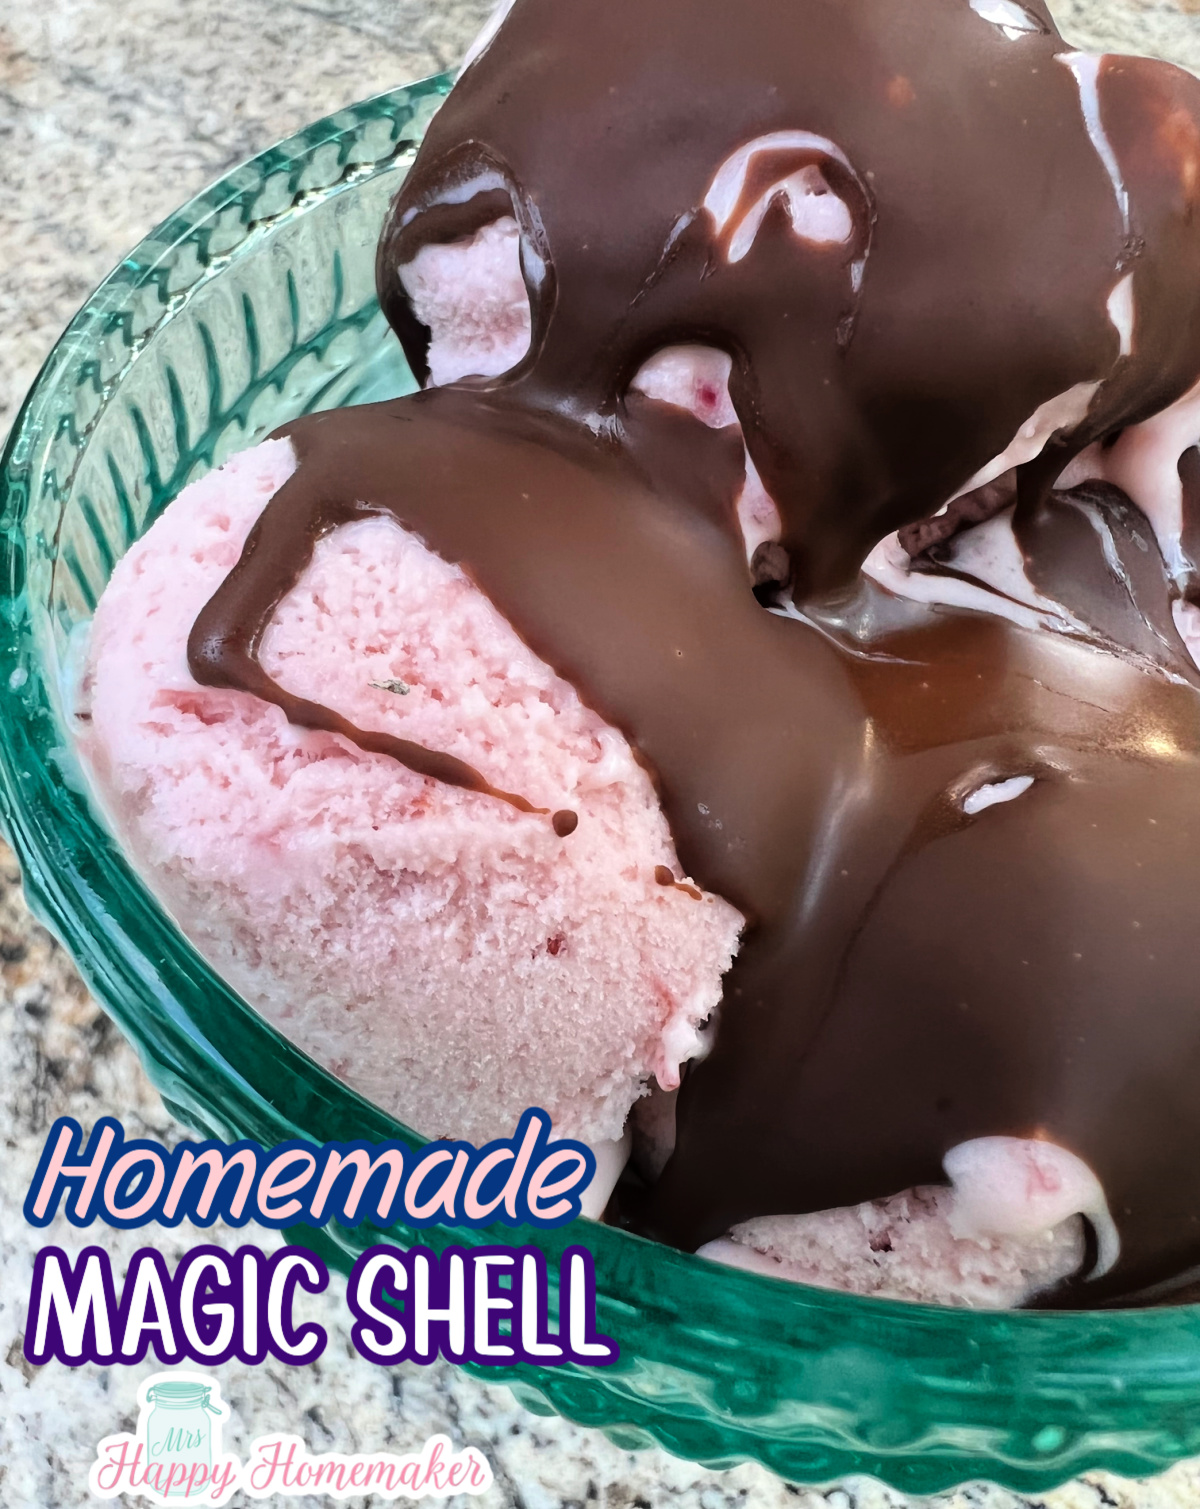 Chocolate magic shell topping over strawberry ice cream in a blue bowl